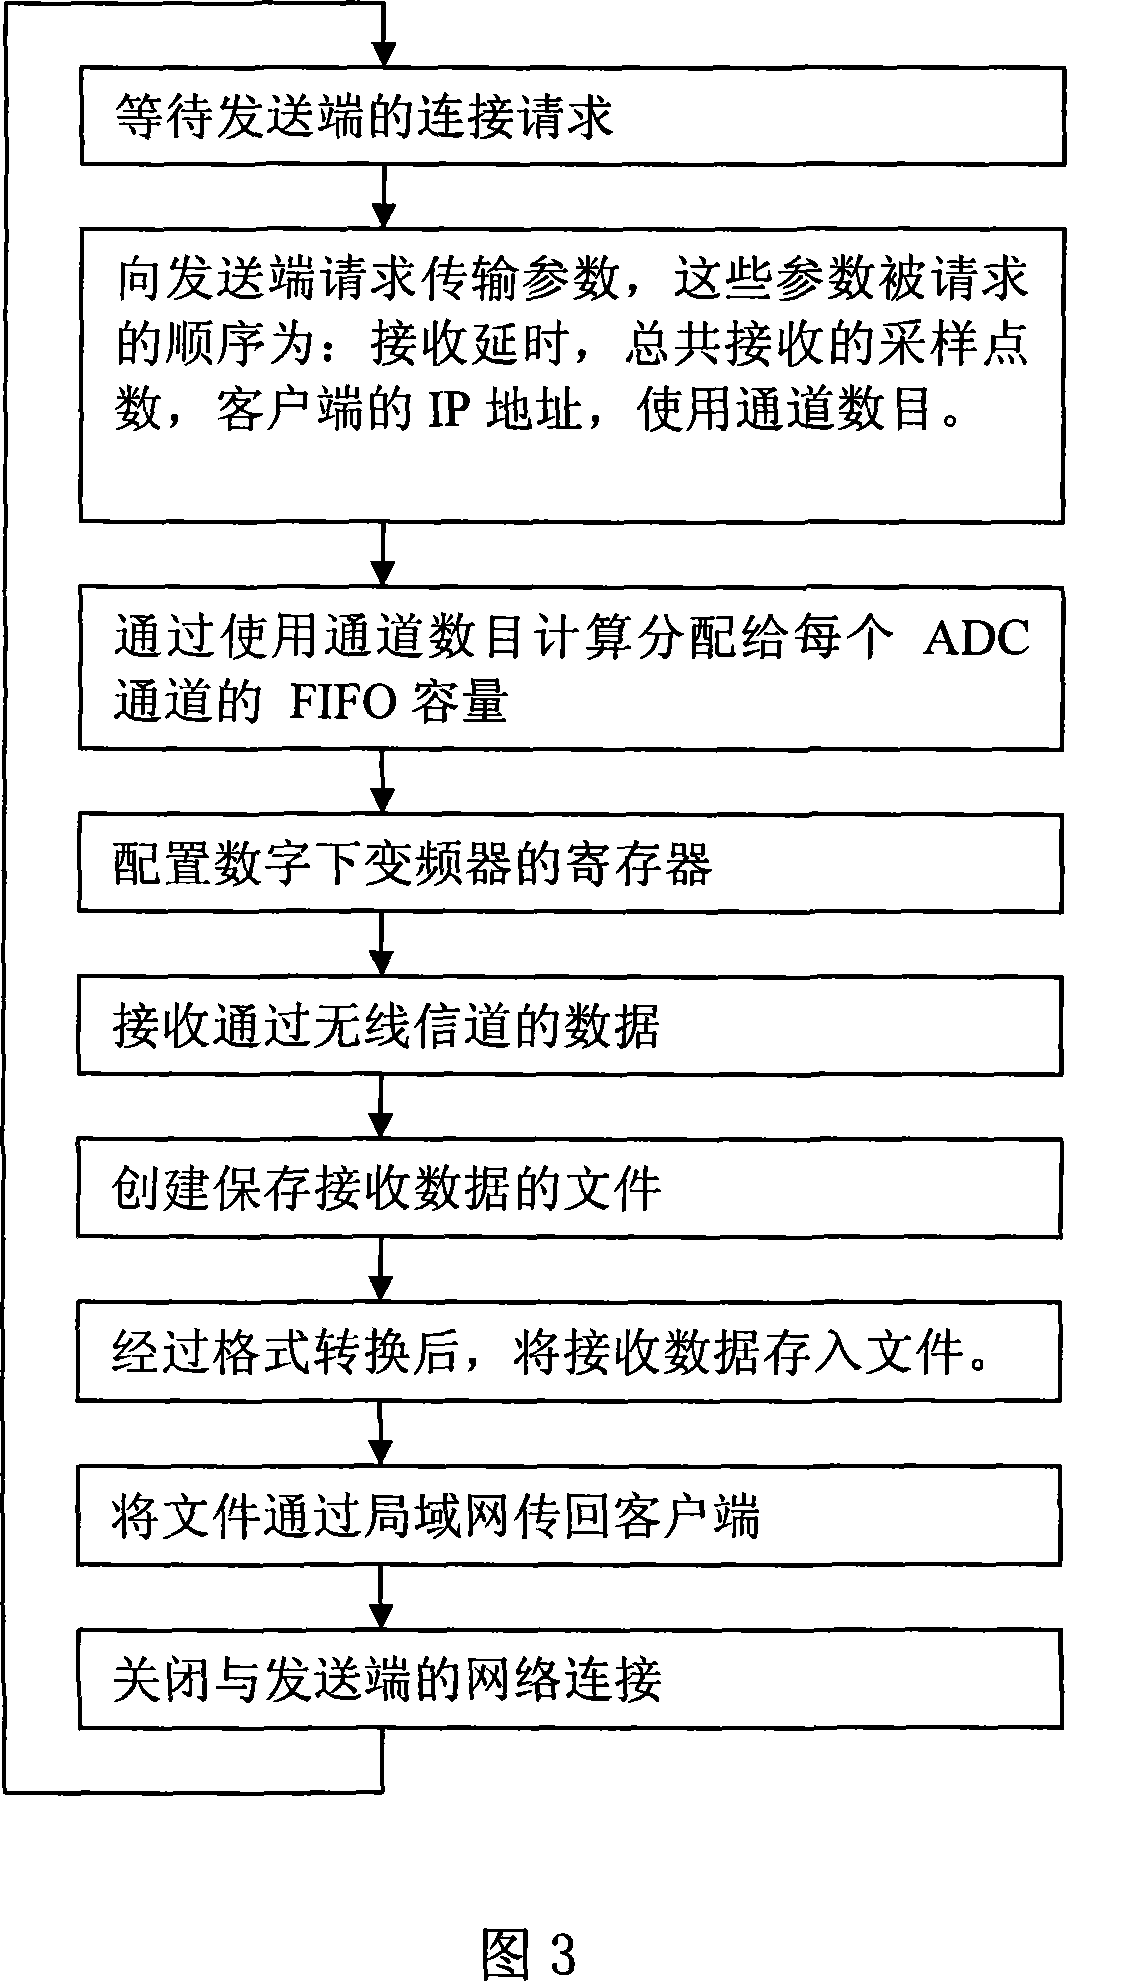 Practical environment testing platform for distributed multi-input and multi-output radio communication system